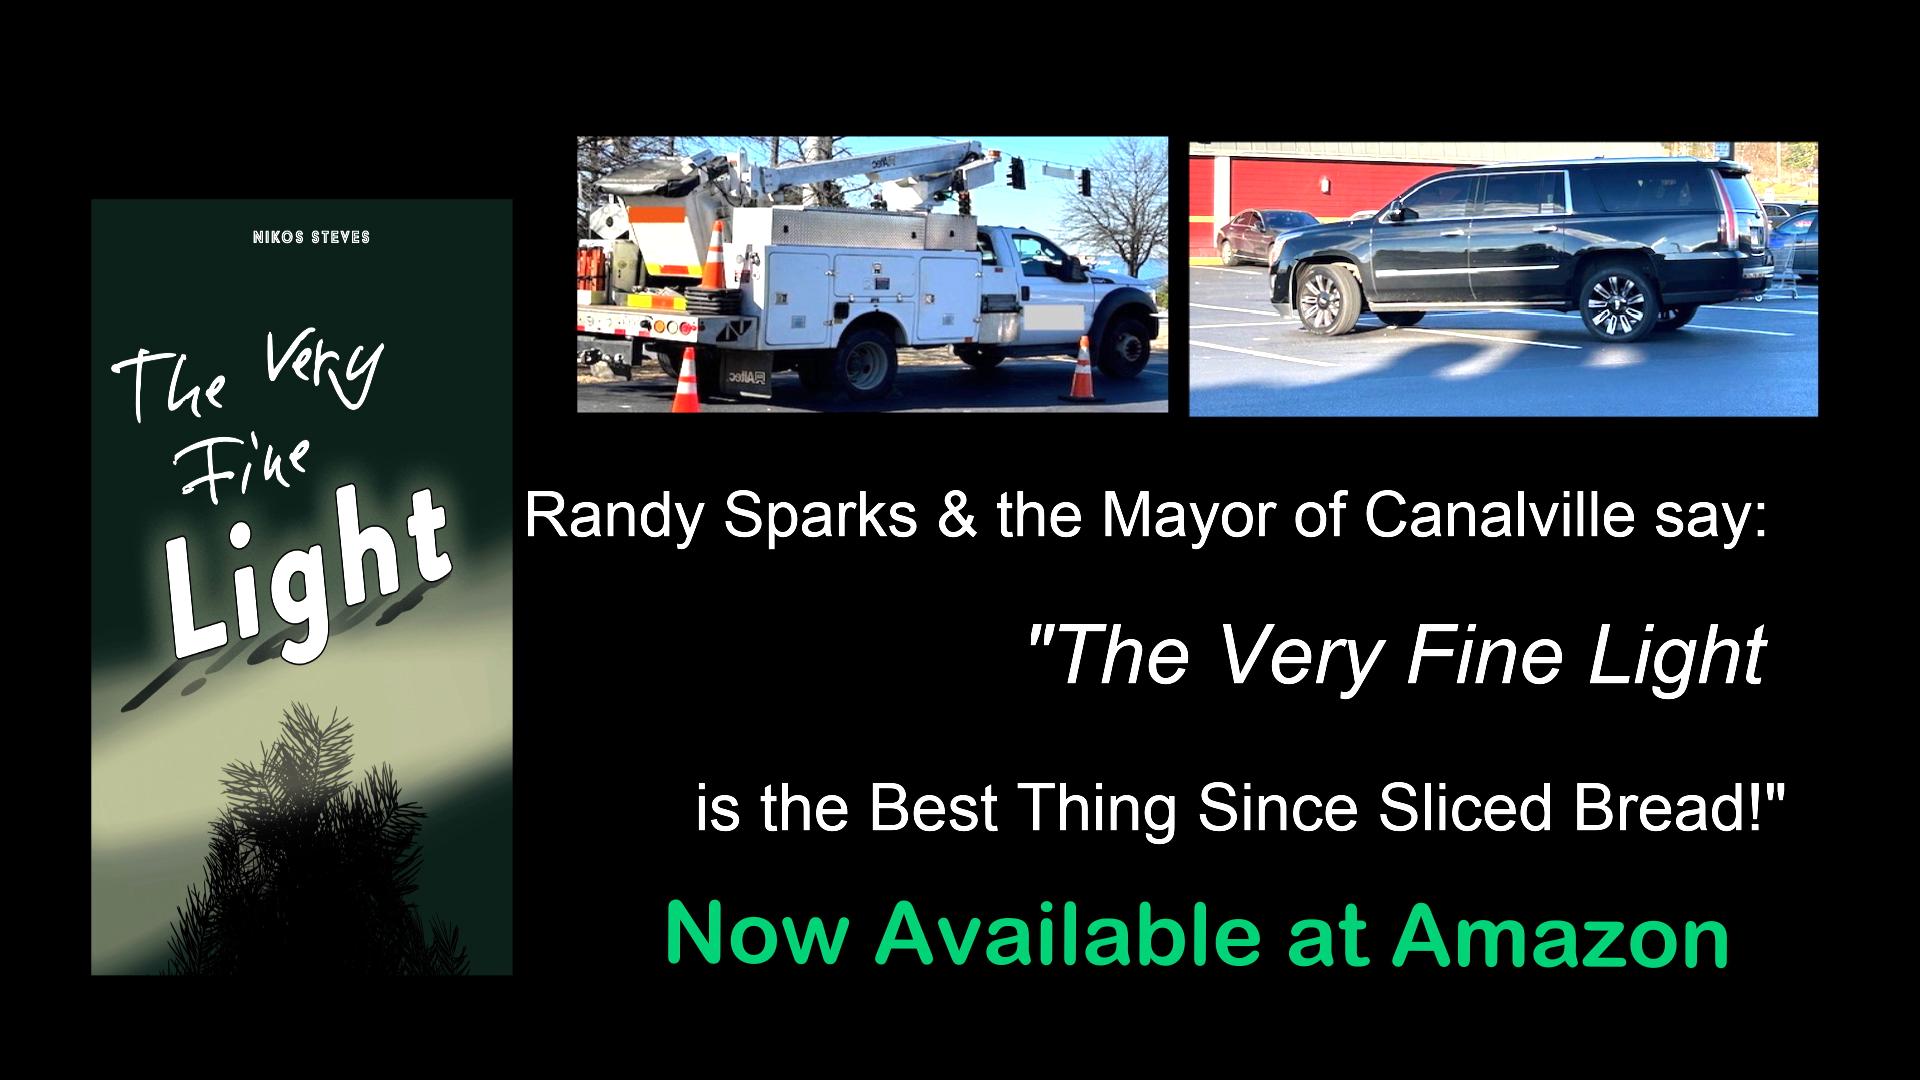 Infographic advertising my book "The Very Fine Light." The text reads, Randy Sparks and the Mayor of Canalville say: The Very Fine Light is the best thing since sliced bread! Below all this text are the words, Book now available at Amazon. This text is over black but has 3 images. A photo of a bucket truck on the left, a picture of a big black SUV on the right plus a taller graphic of the cover of my book, "The Very Fine Light' off to the left side.